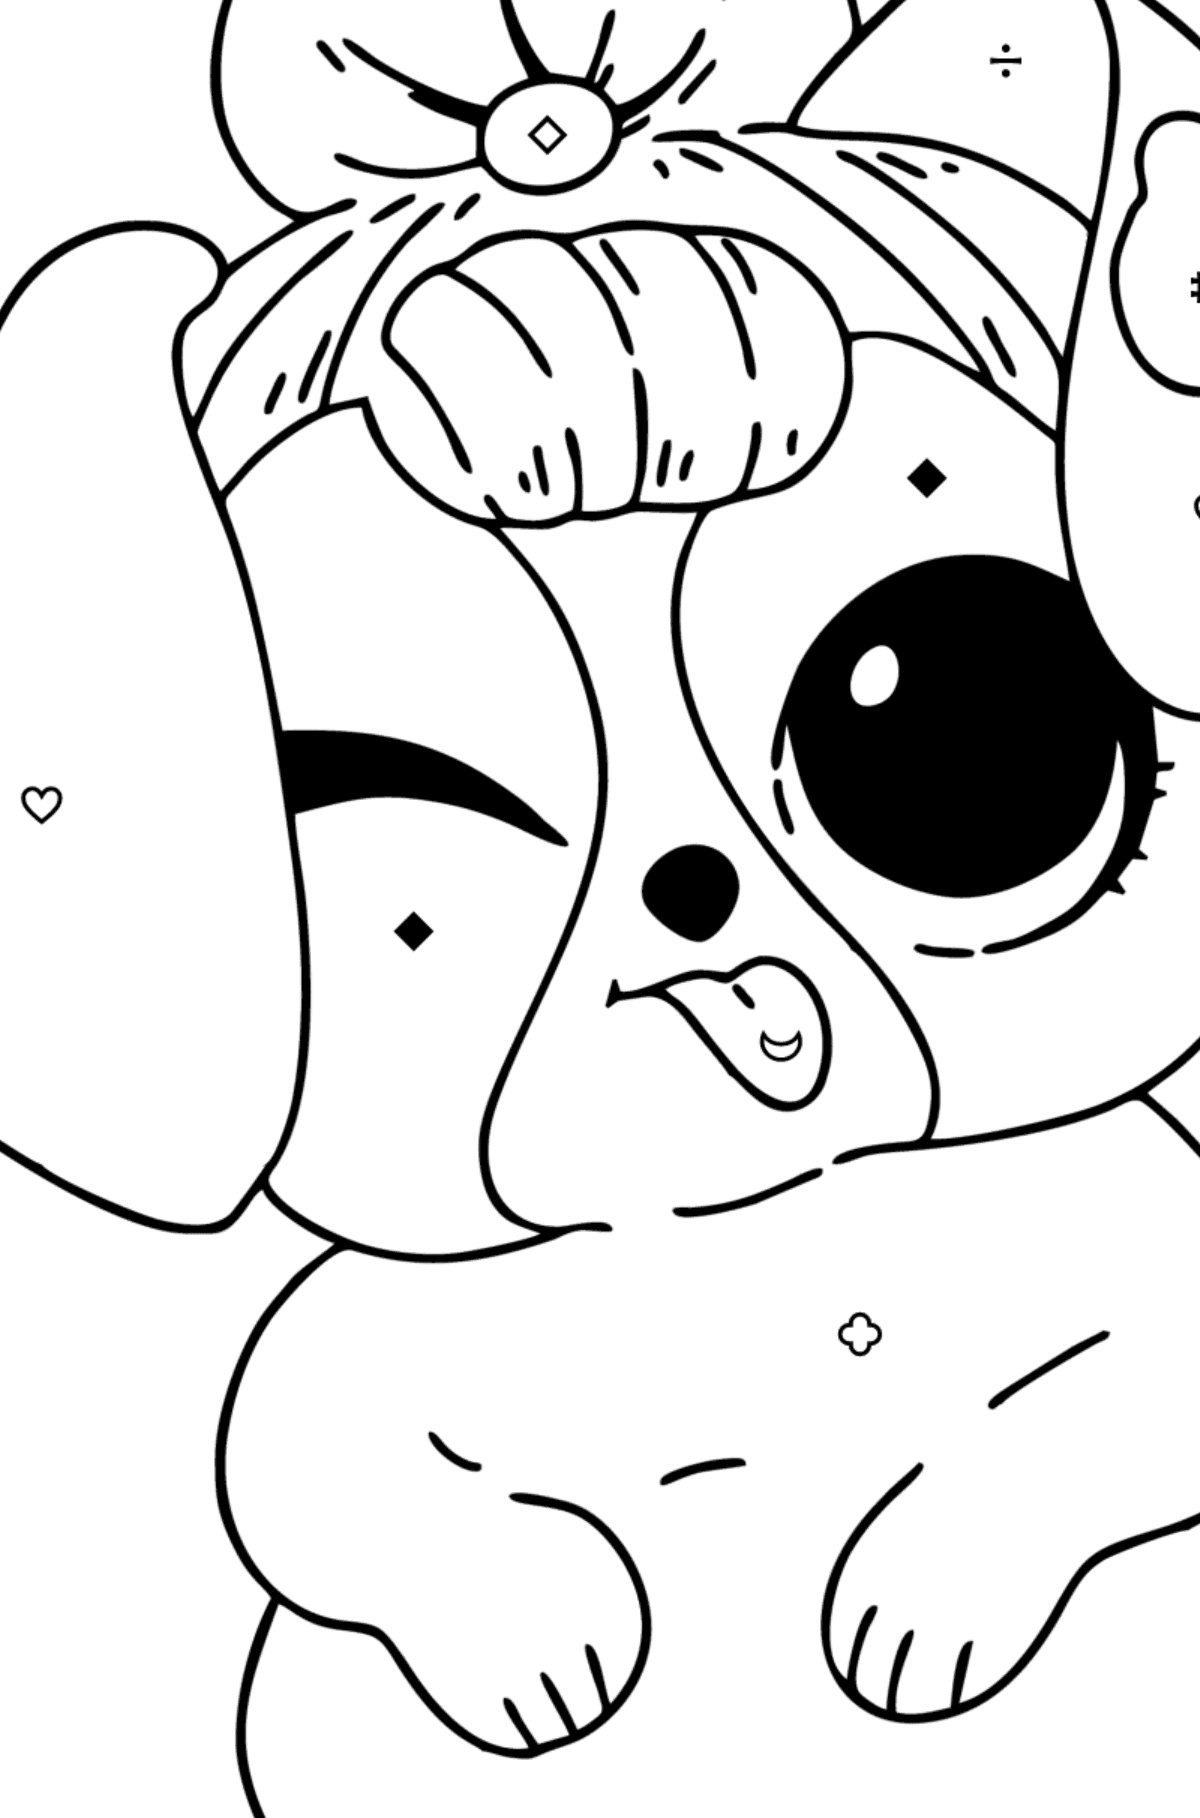 Coloring page LOL pet cute puppy - Coloring by Symbols and Geometric Shapes for Kids